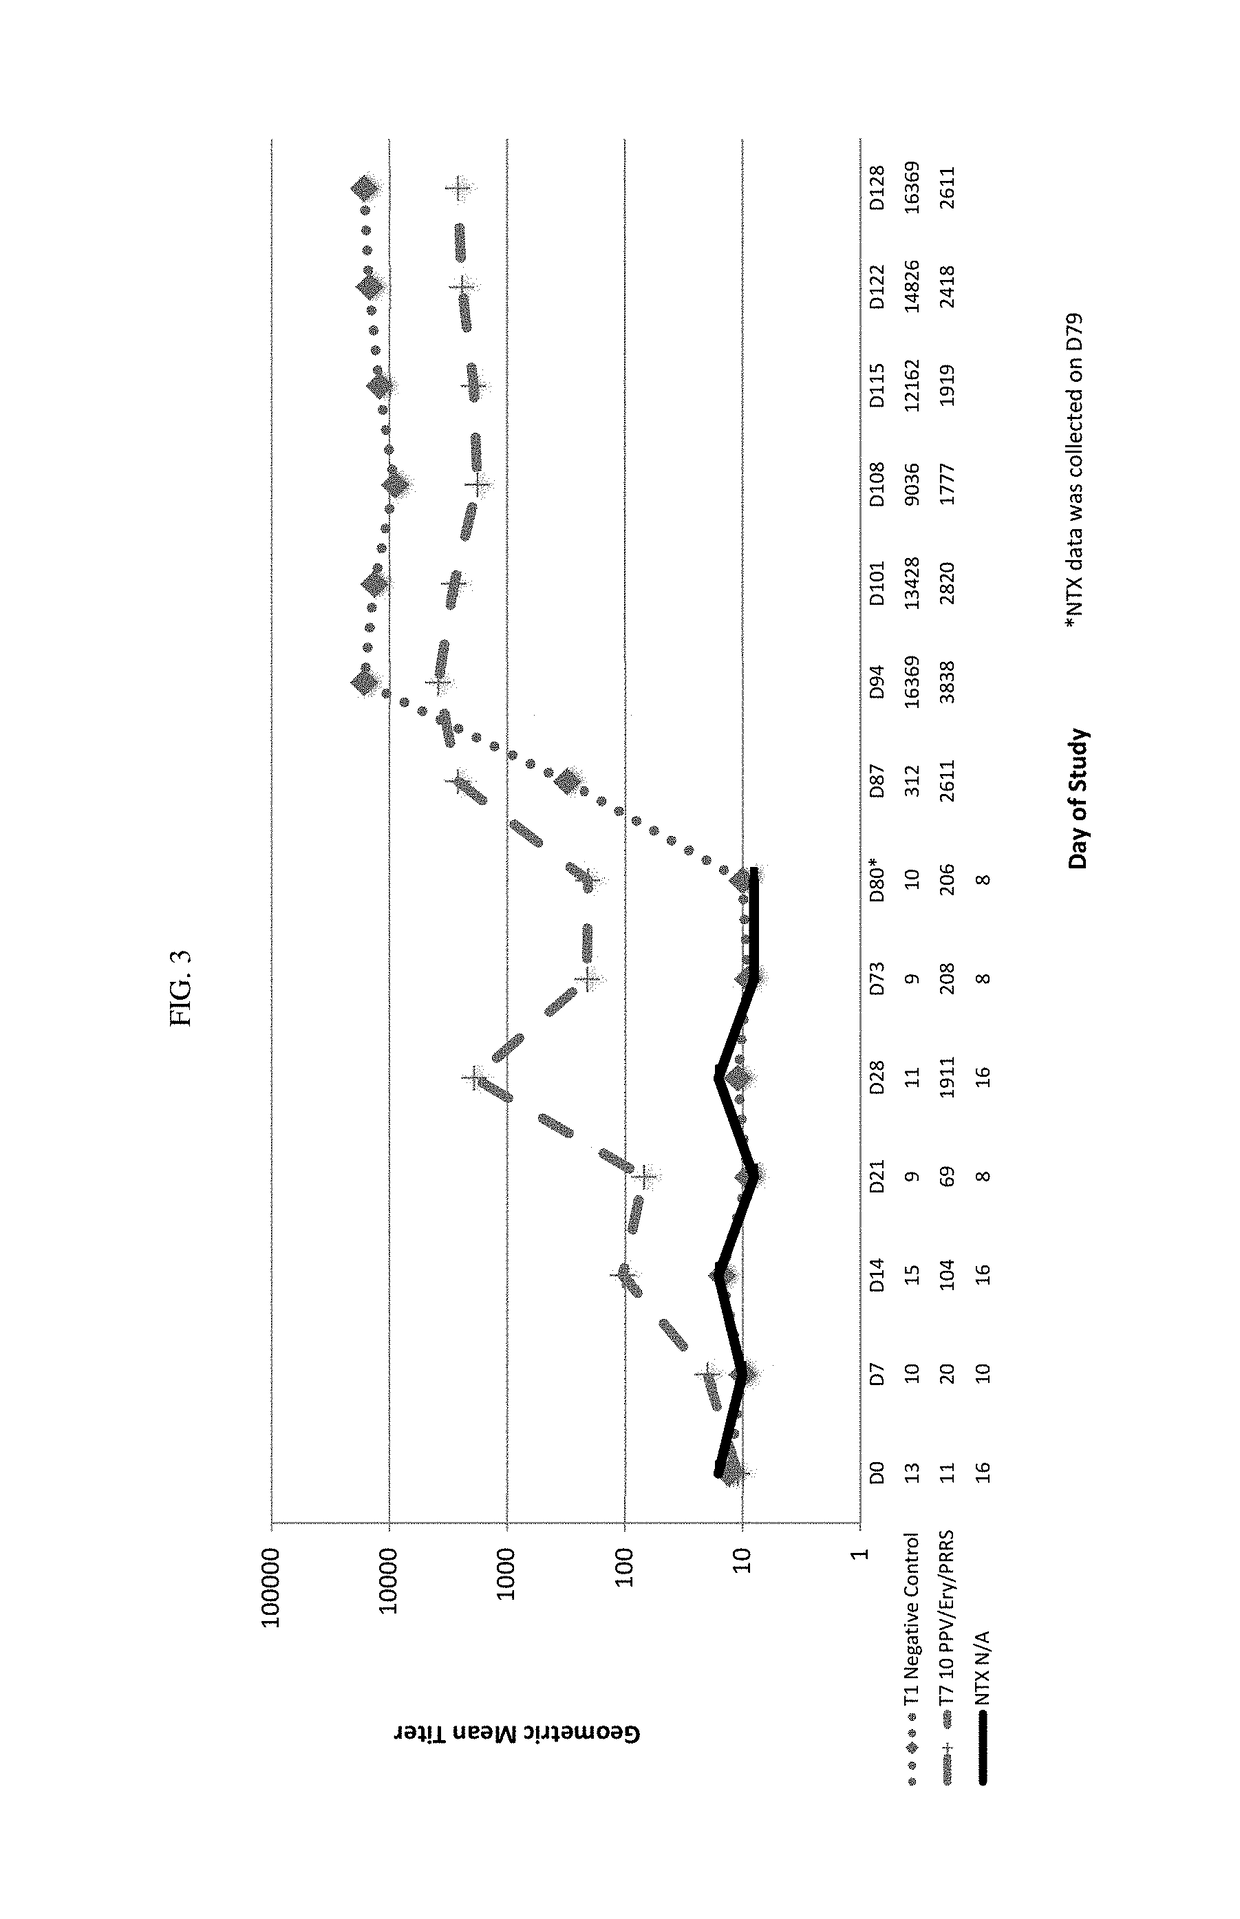 Vaccine against porcine parvovirus and porcine reproductive and respiratory syndrome virus and methods of production thereof